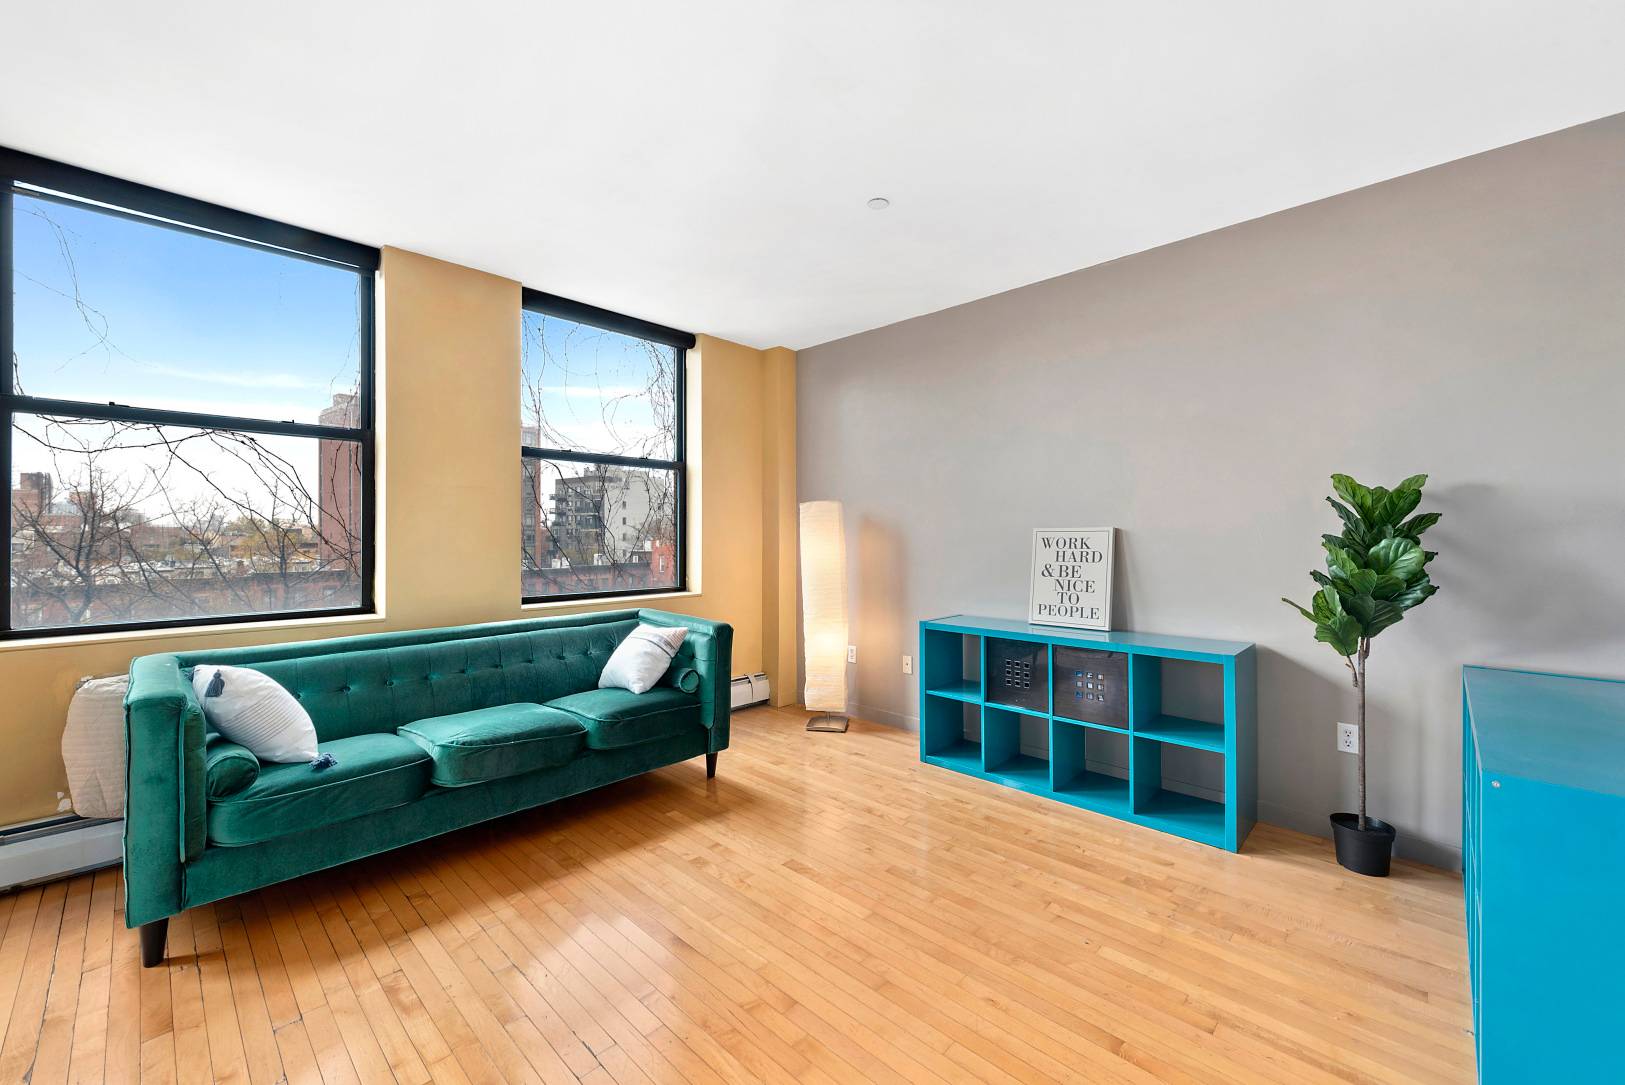 219 17th Street 5A is a two bedroom, two bathroom condo with views of the Verrazano Bridge to the south and Manhattan to the north.